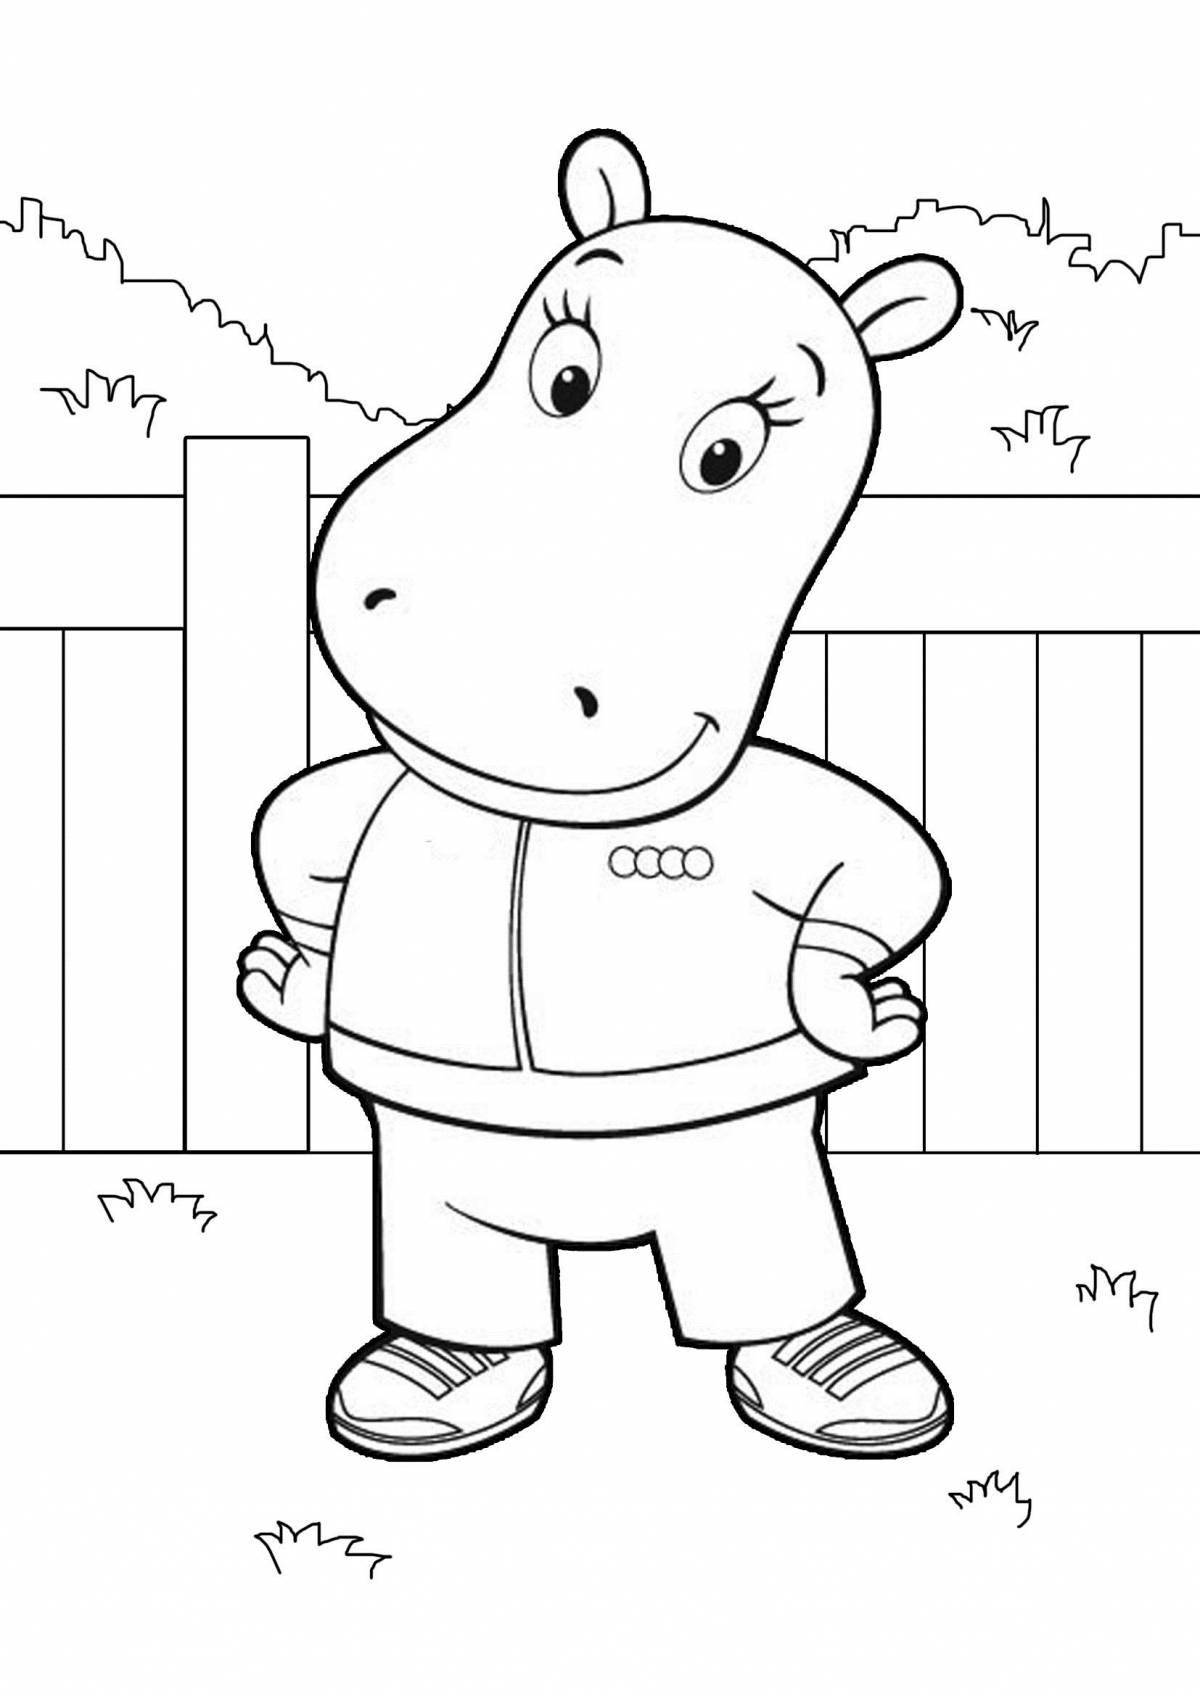 Happy hippo coloring page